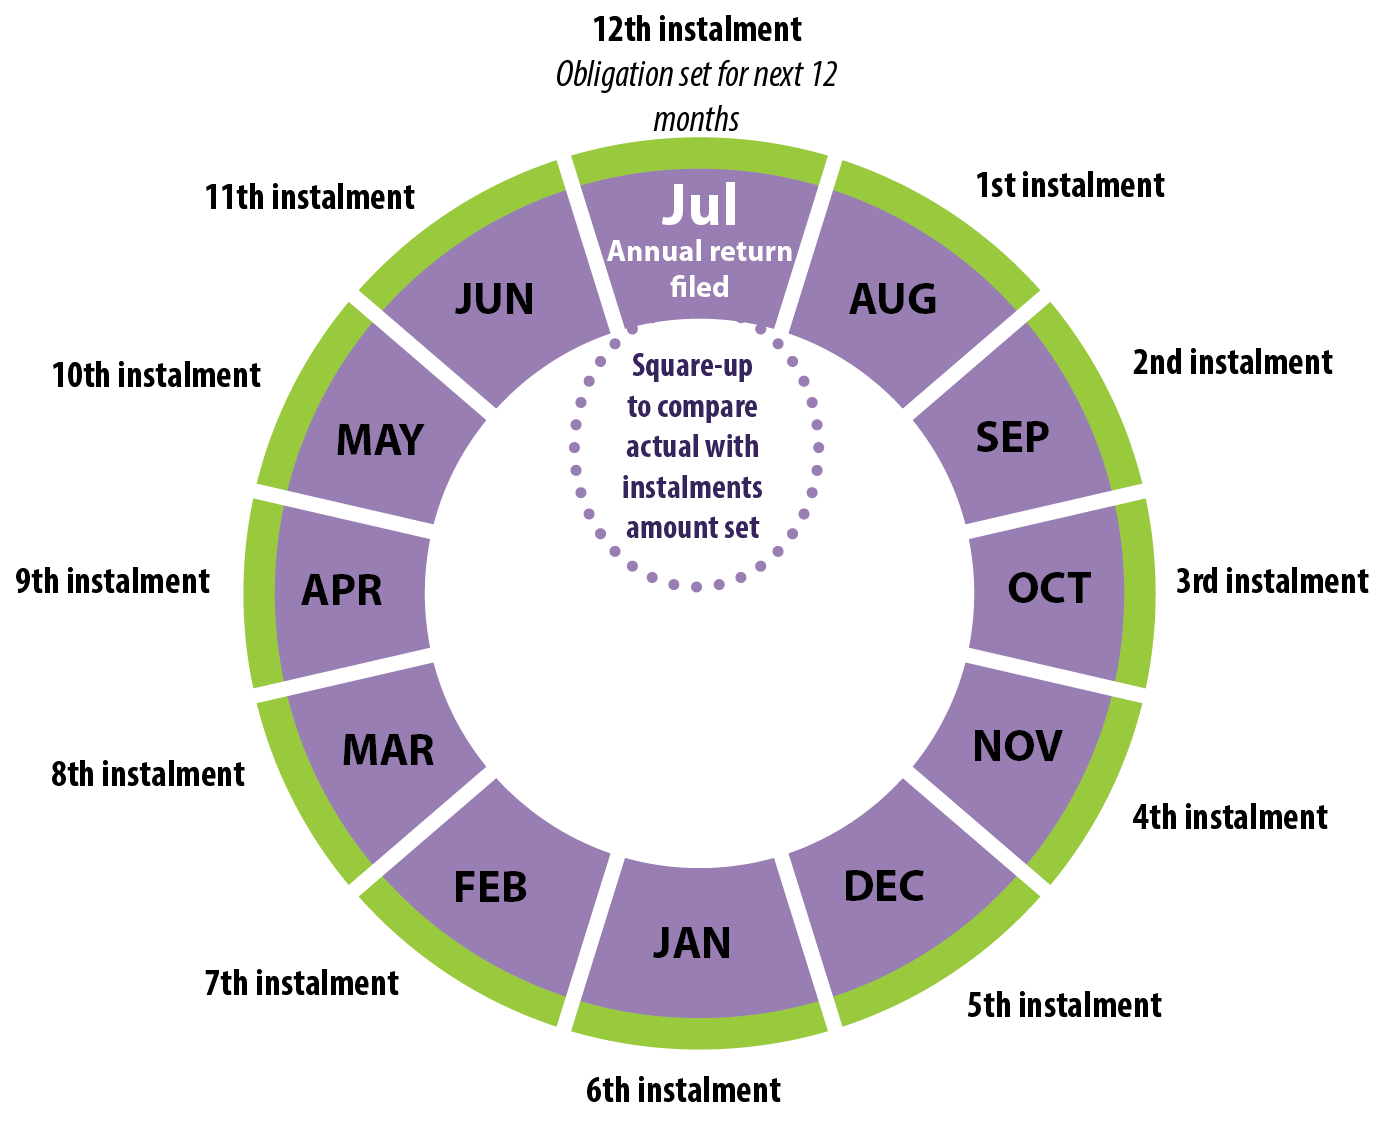 Circle with twelve months starting in July in a clockwise direction, showing instalment and any other events for student loan payments.